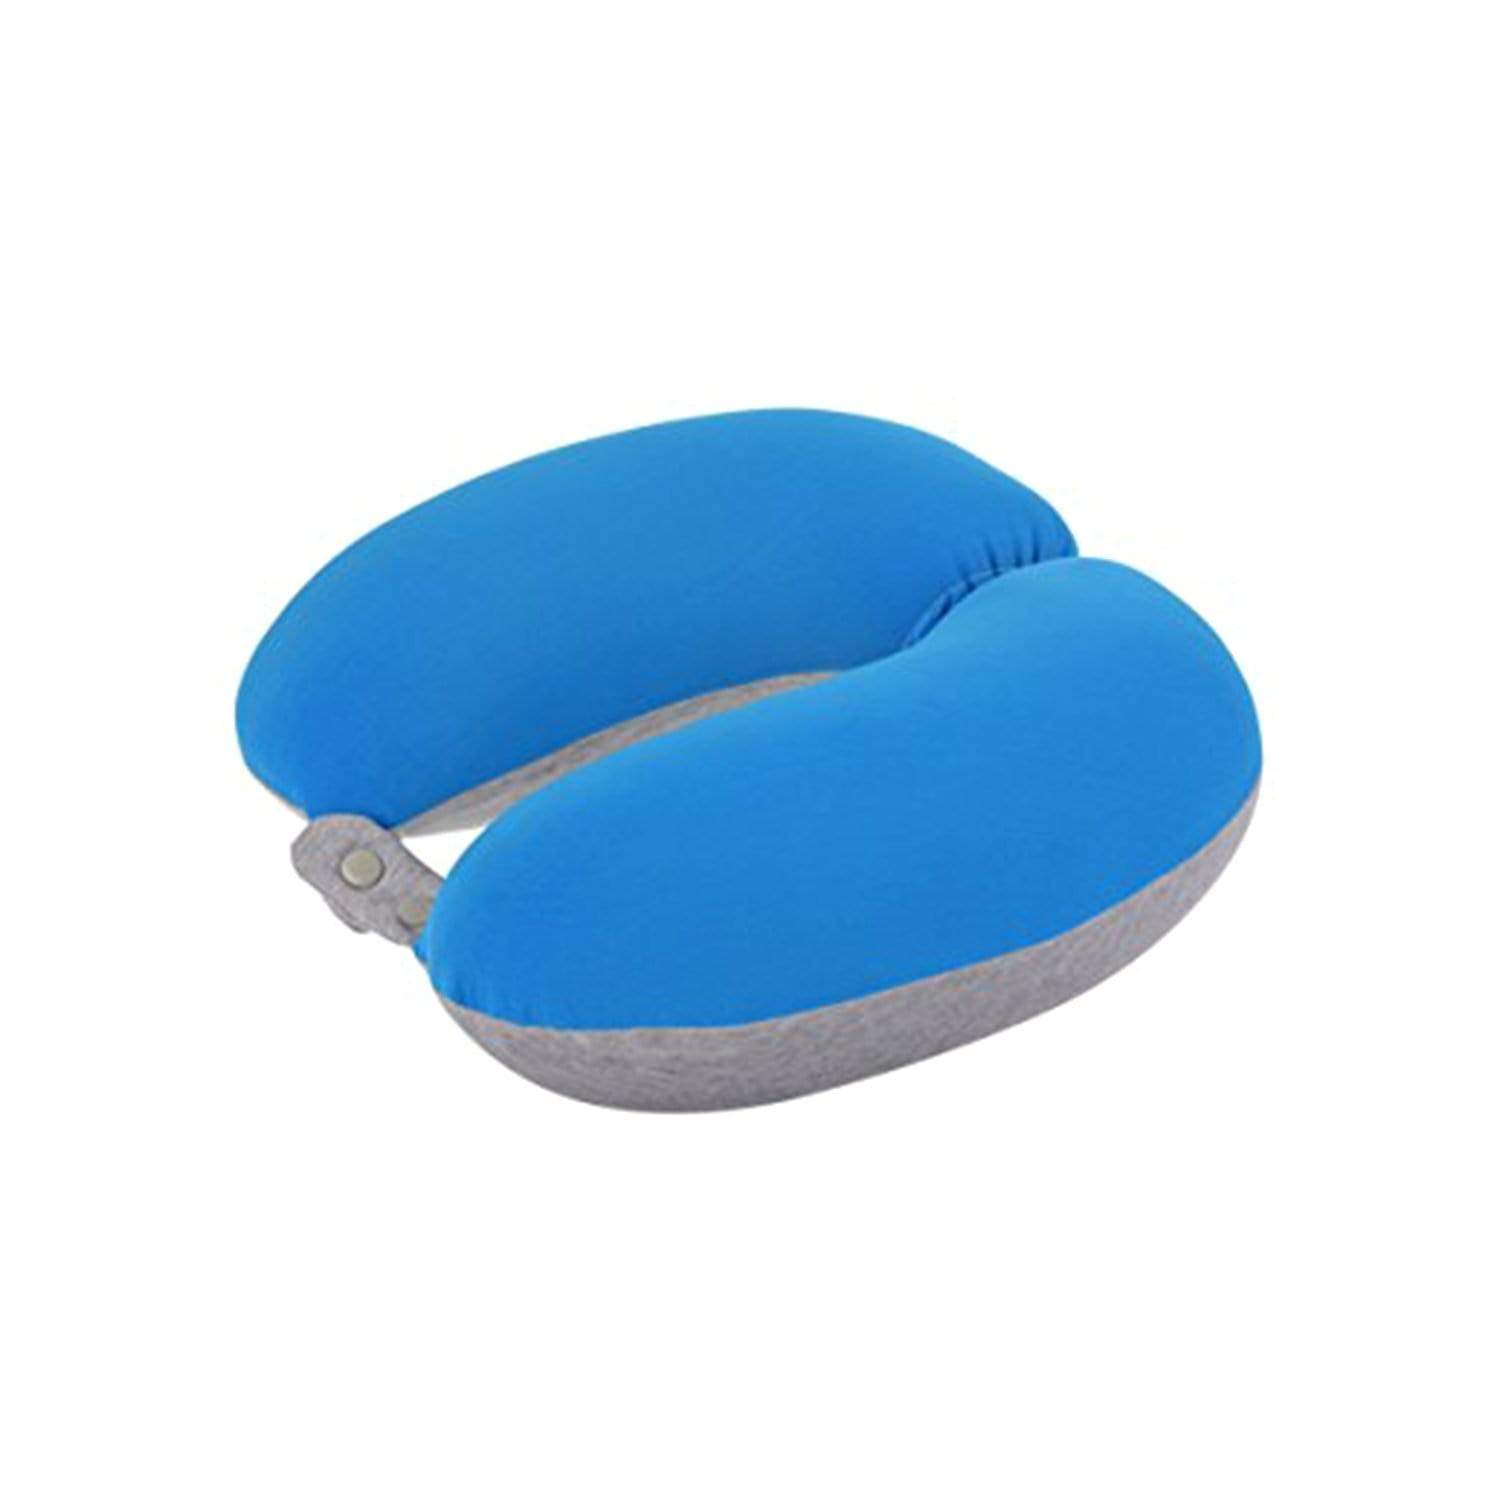 Be Relax My Hoodie Neck Pillow - Blue - 1001300031 - Jashanmal Home